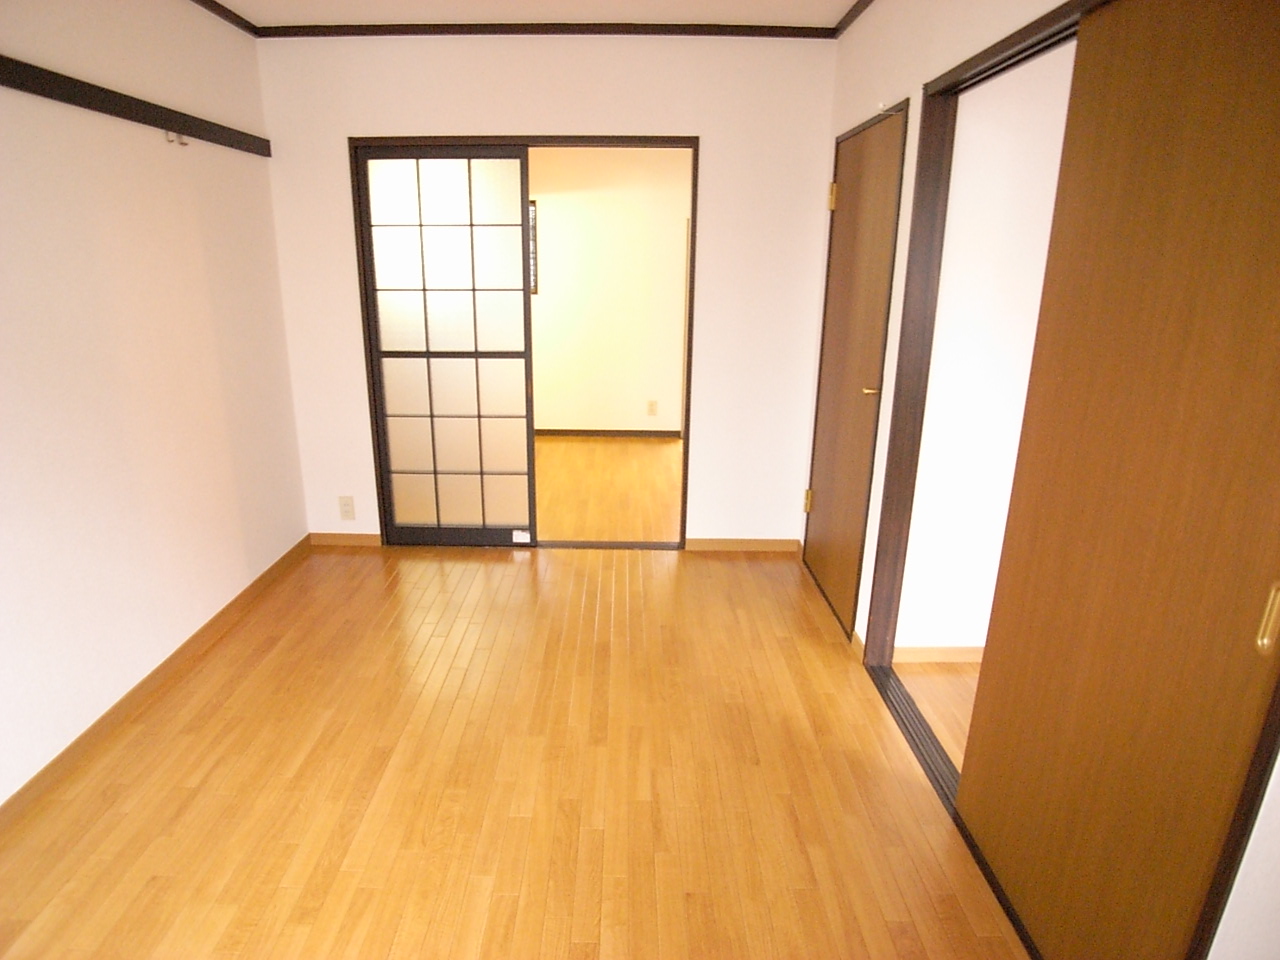 Living and room. Kifusuma of all rooms Western-style is cost also is profitable at the time of departure